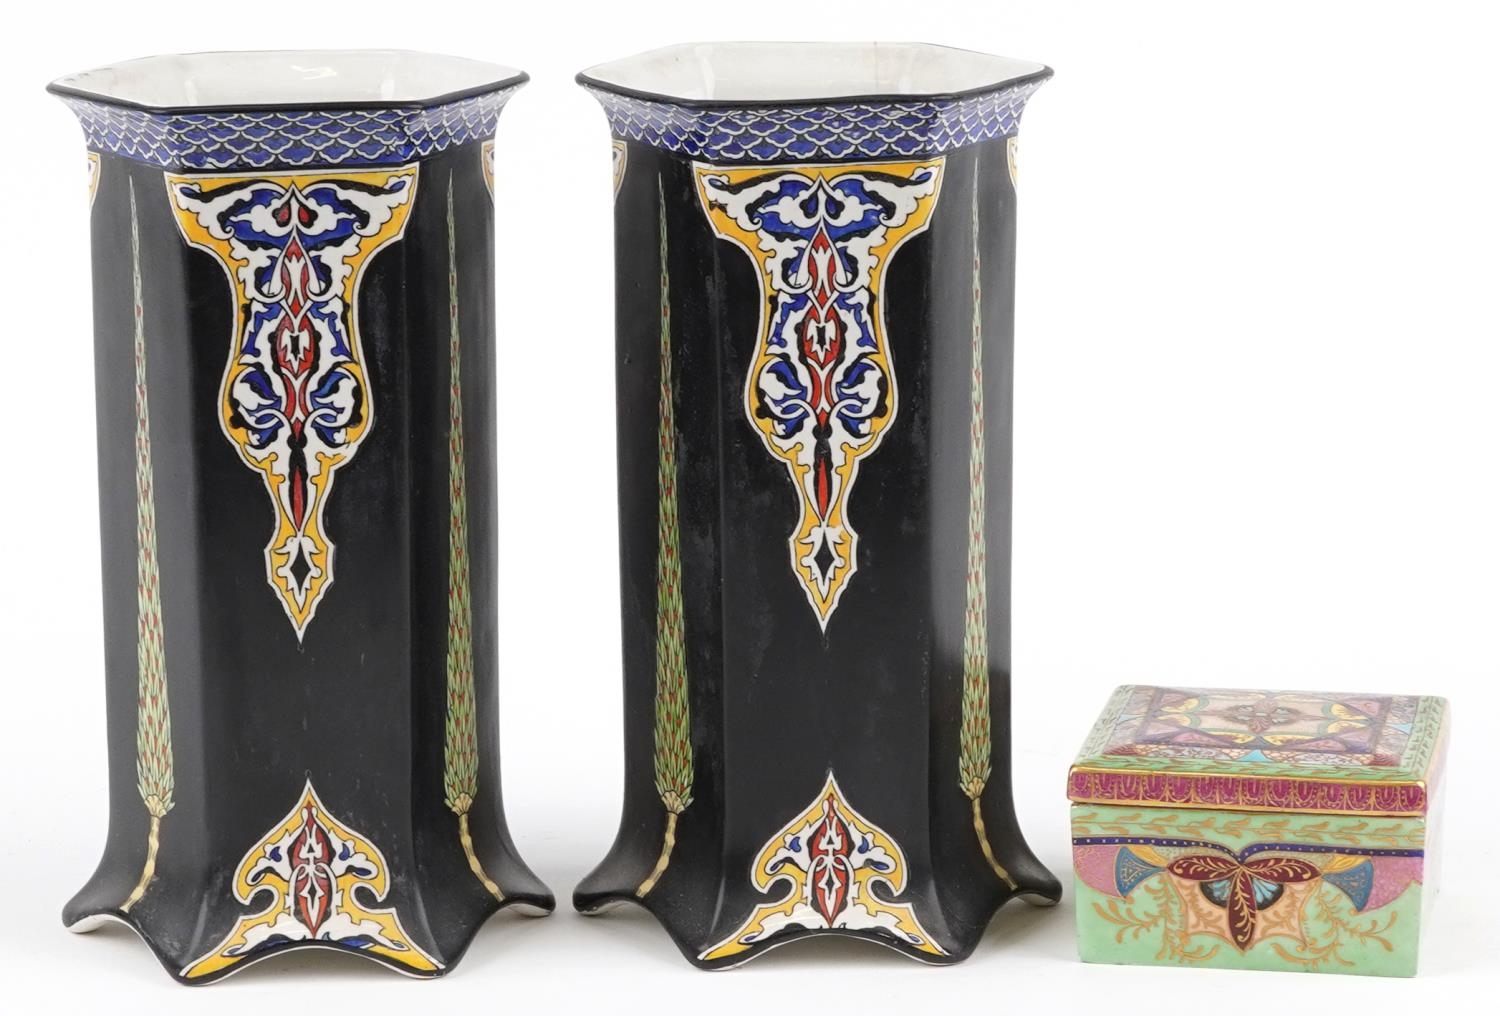 Pair of Art Nouveau hexagonal vases decorated with foliate motifs and a 1930s square box and cover